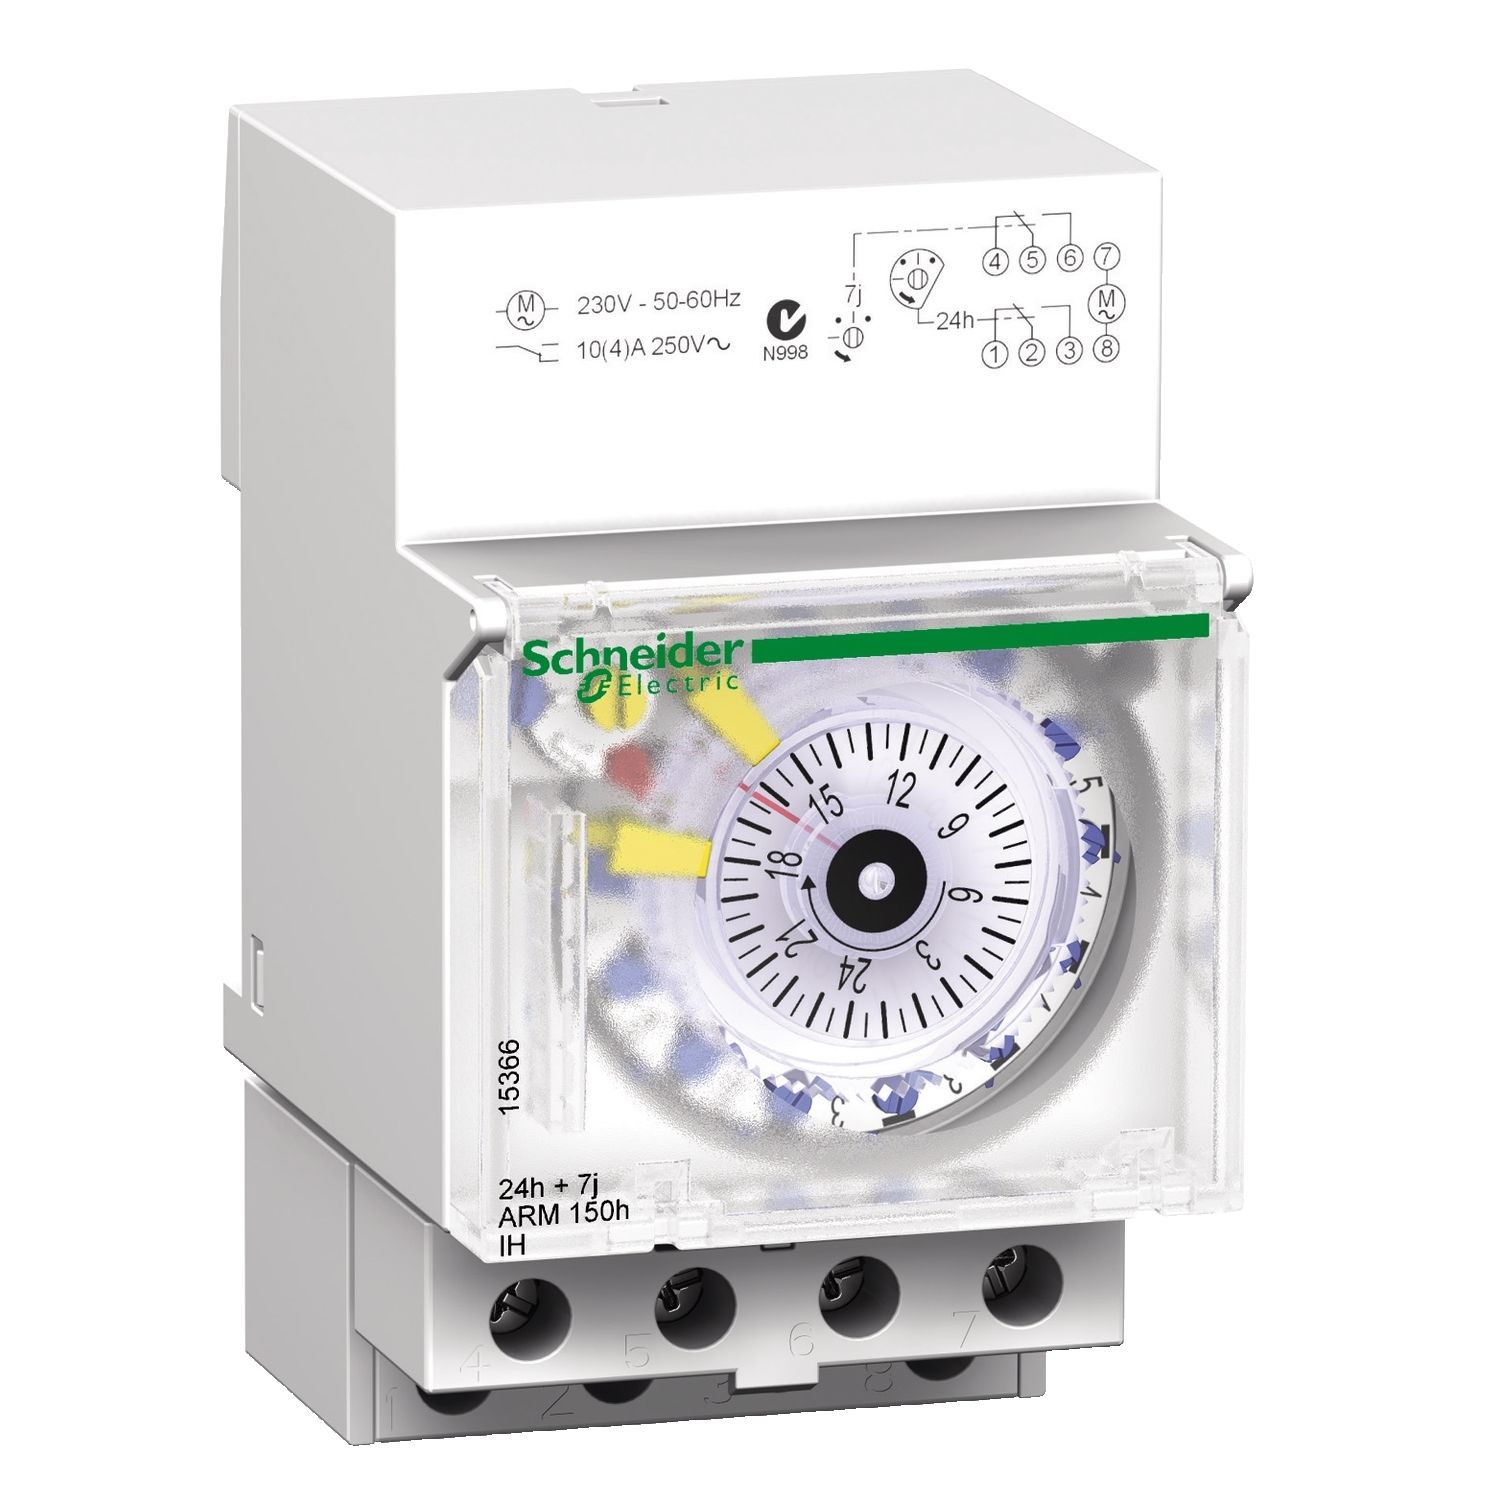 15366 Acti9 - IH - mechanical time switch - 24 hours + 7 days - 150 h memory